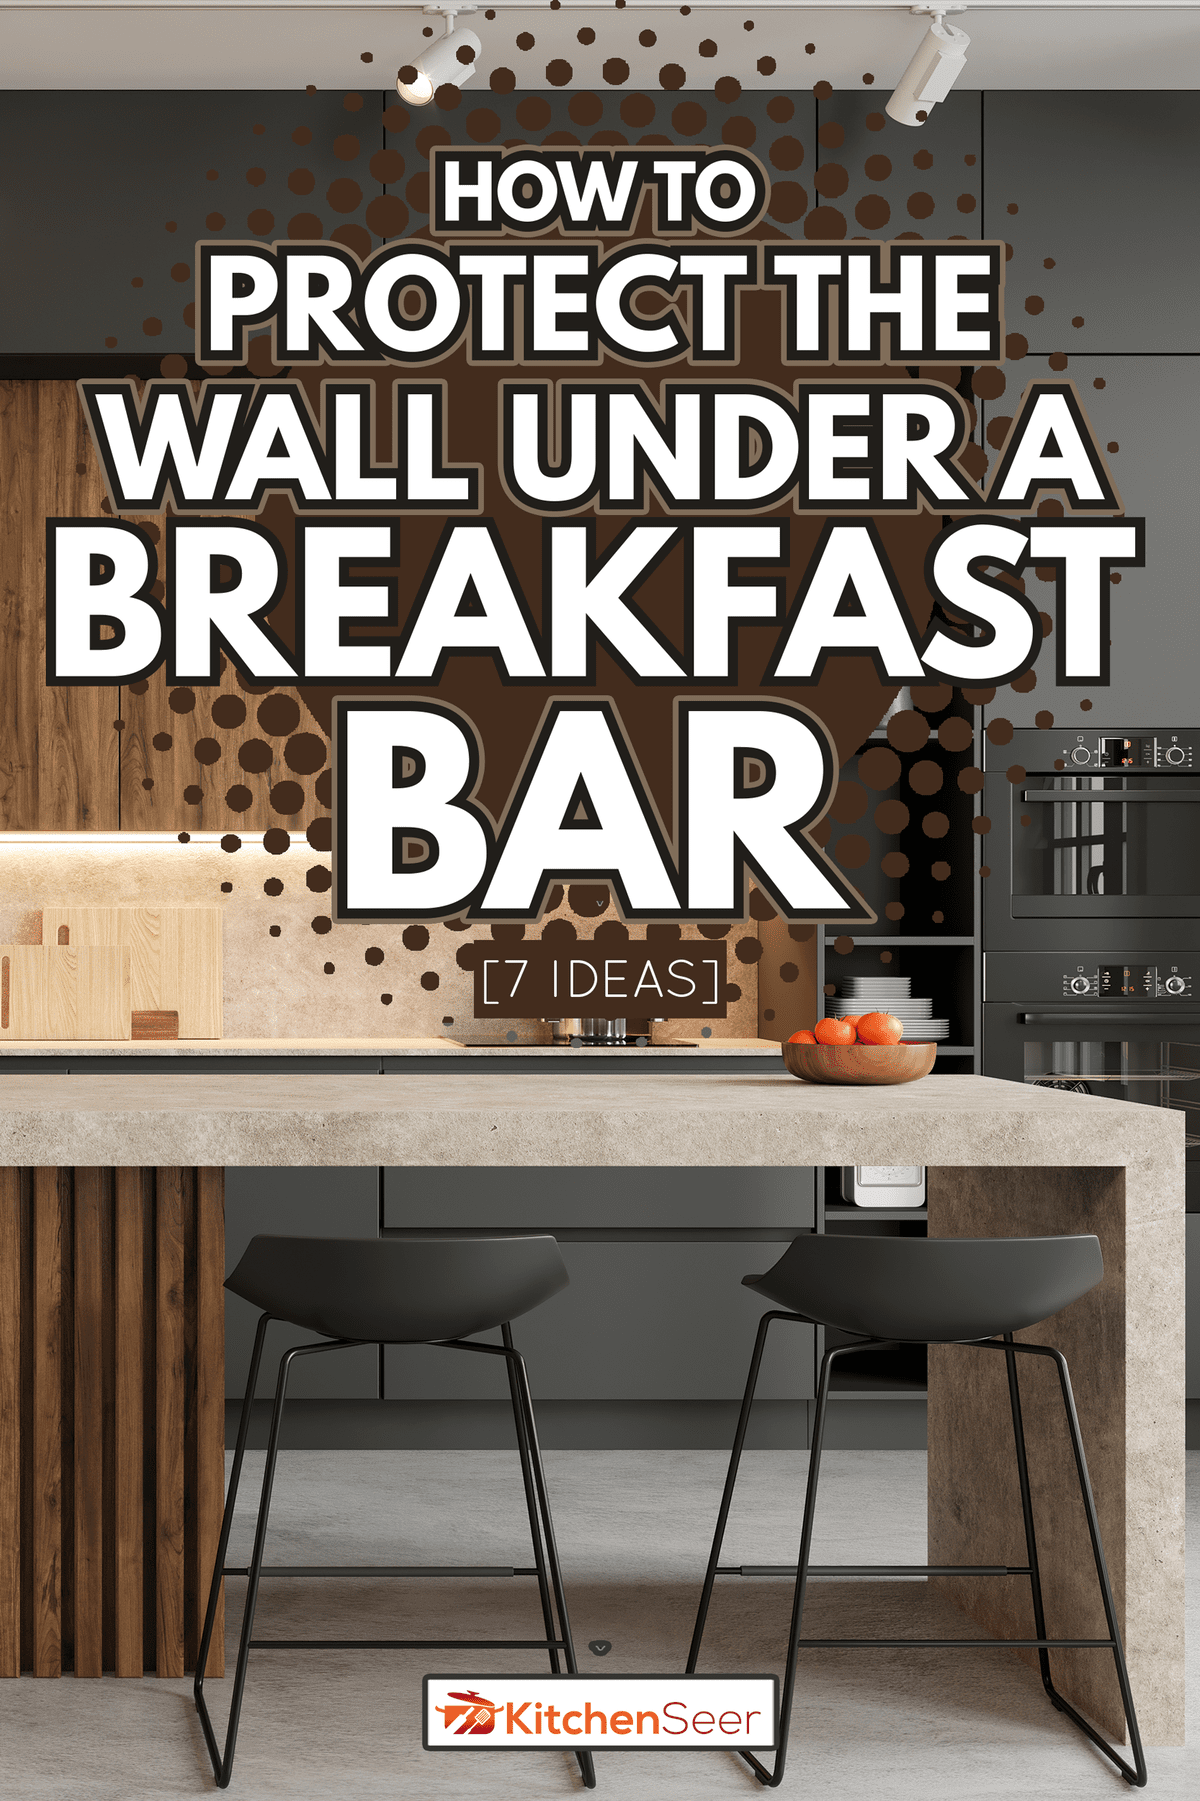 Large modern open space loft kitchen interior with large kitchen island and bar chairs - How To Protect The Wall Under A Breakfast Bar [7 Ideas]